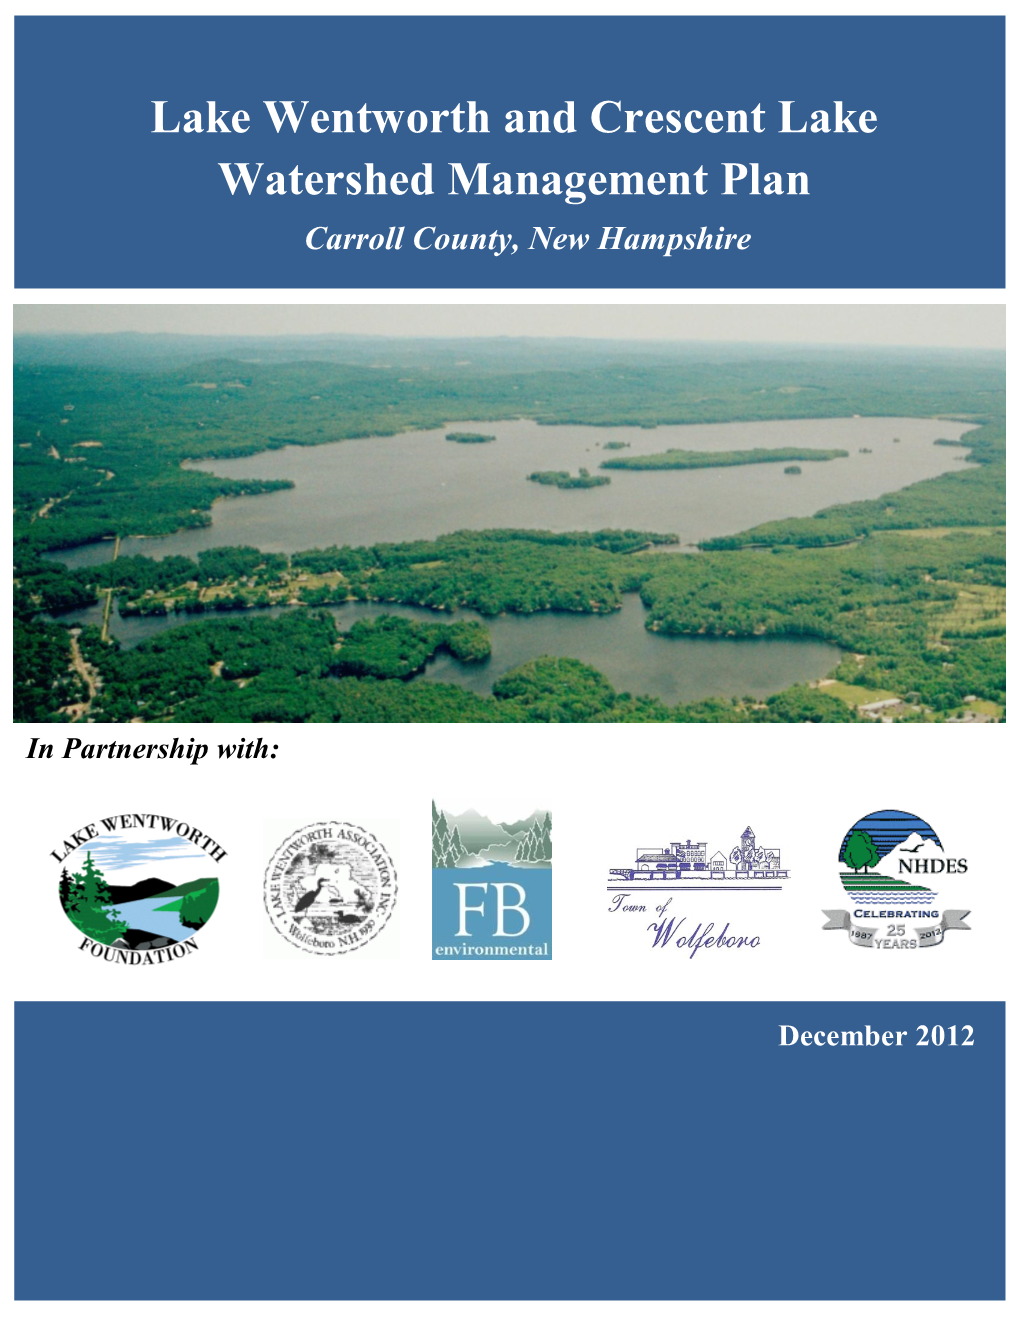 Lake Wentworth and Crescent Lake Watershed Management Plan